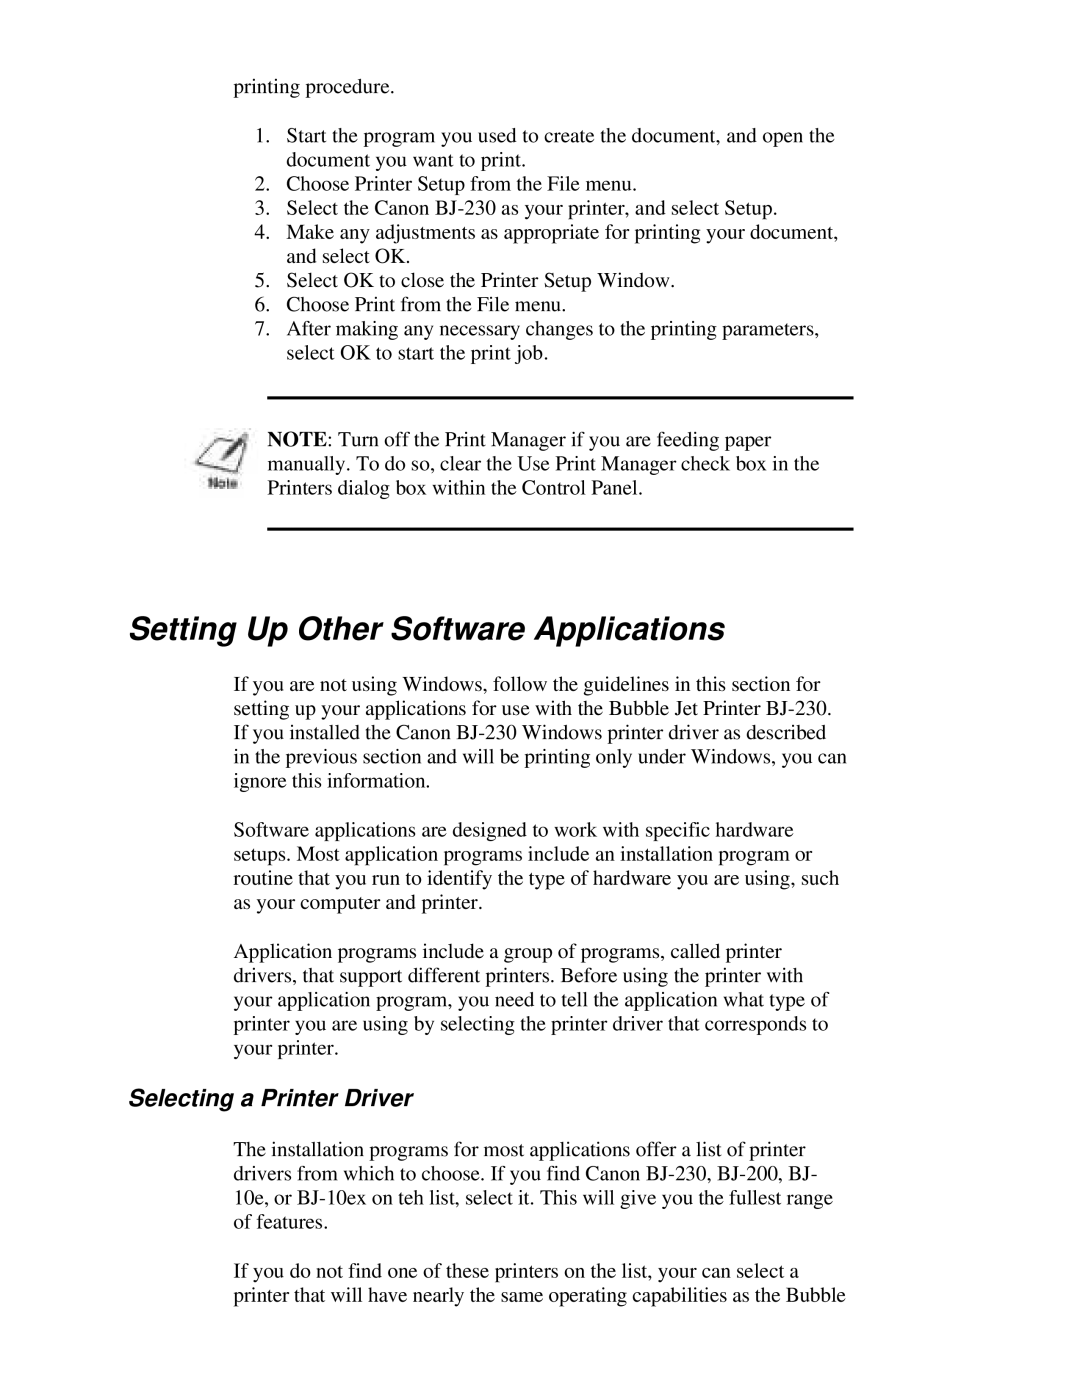 Canon BJ-230 user manual Setting Up Other Software Applications, Selecting a Printer Driver 